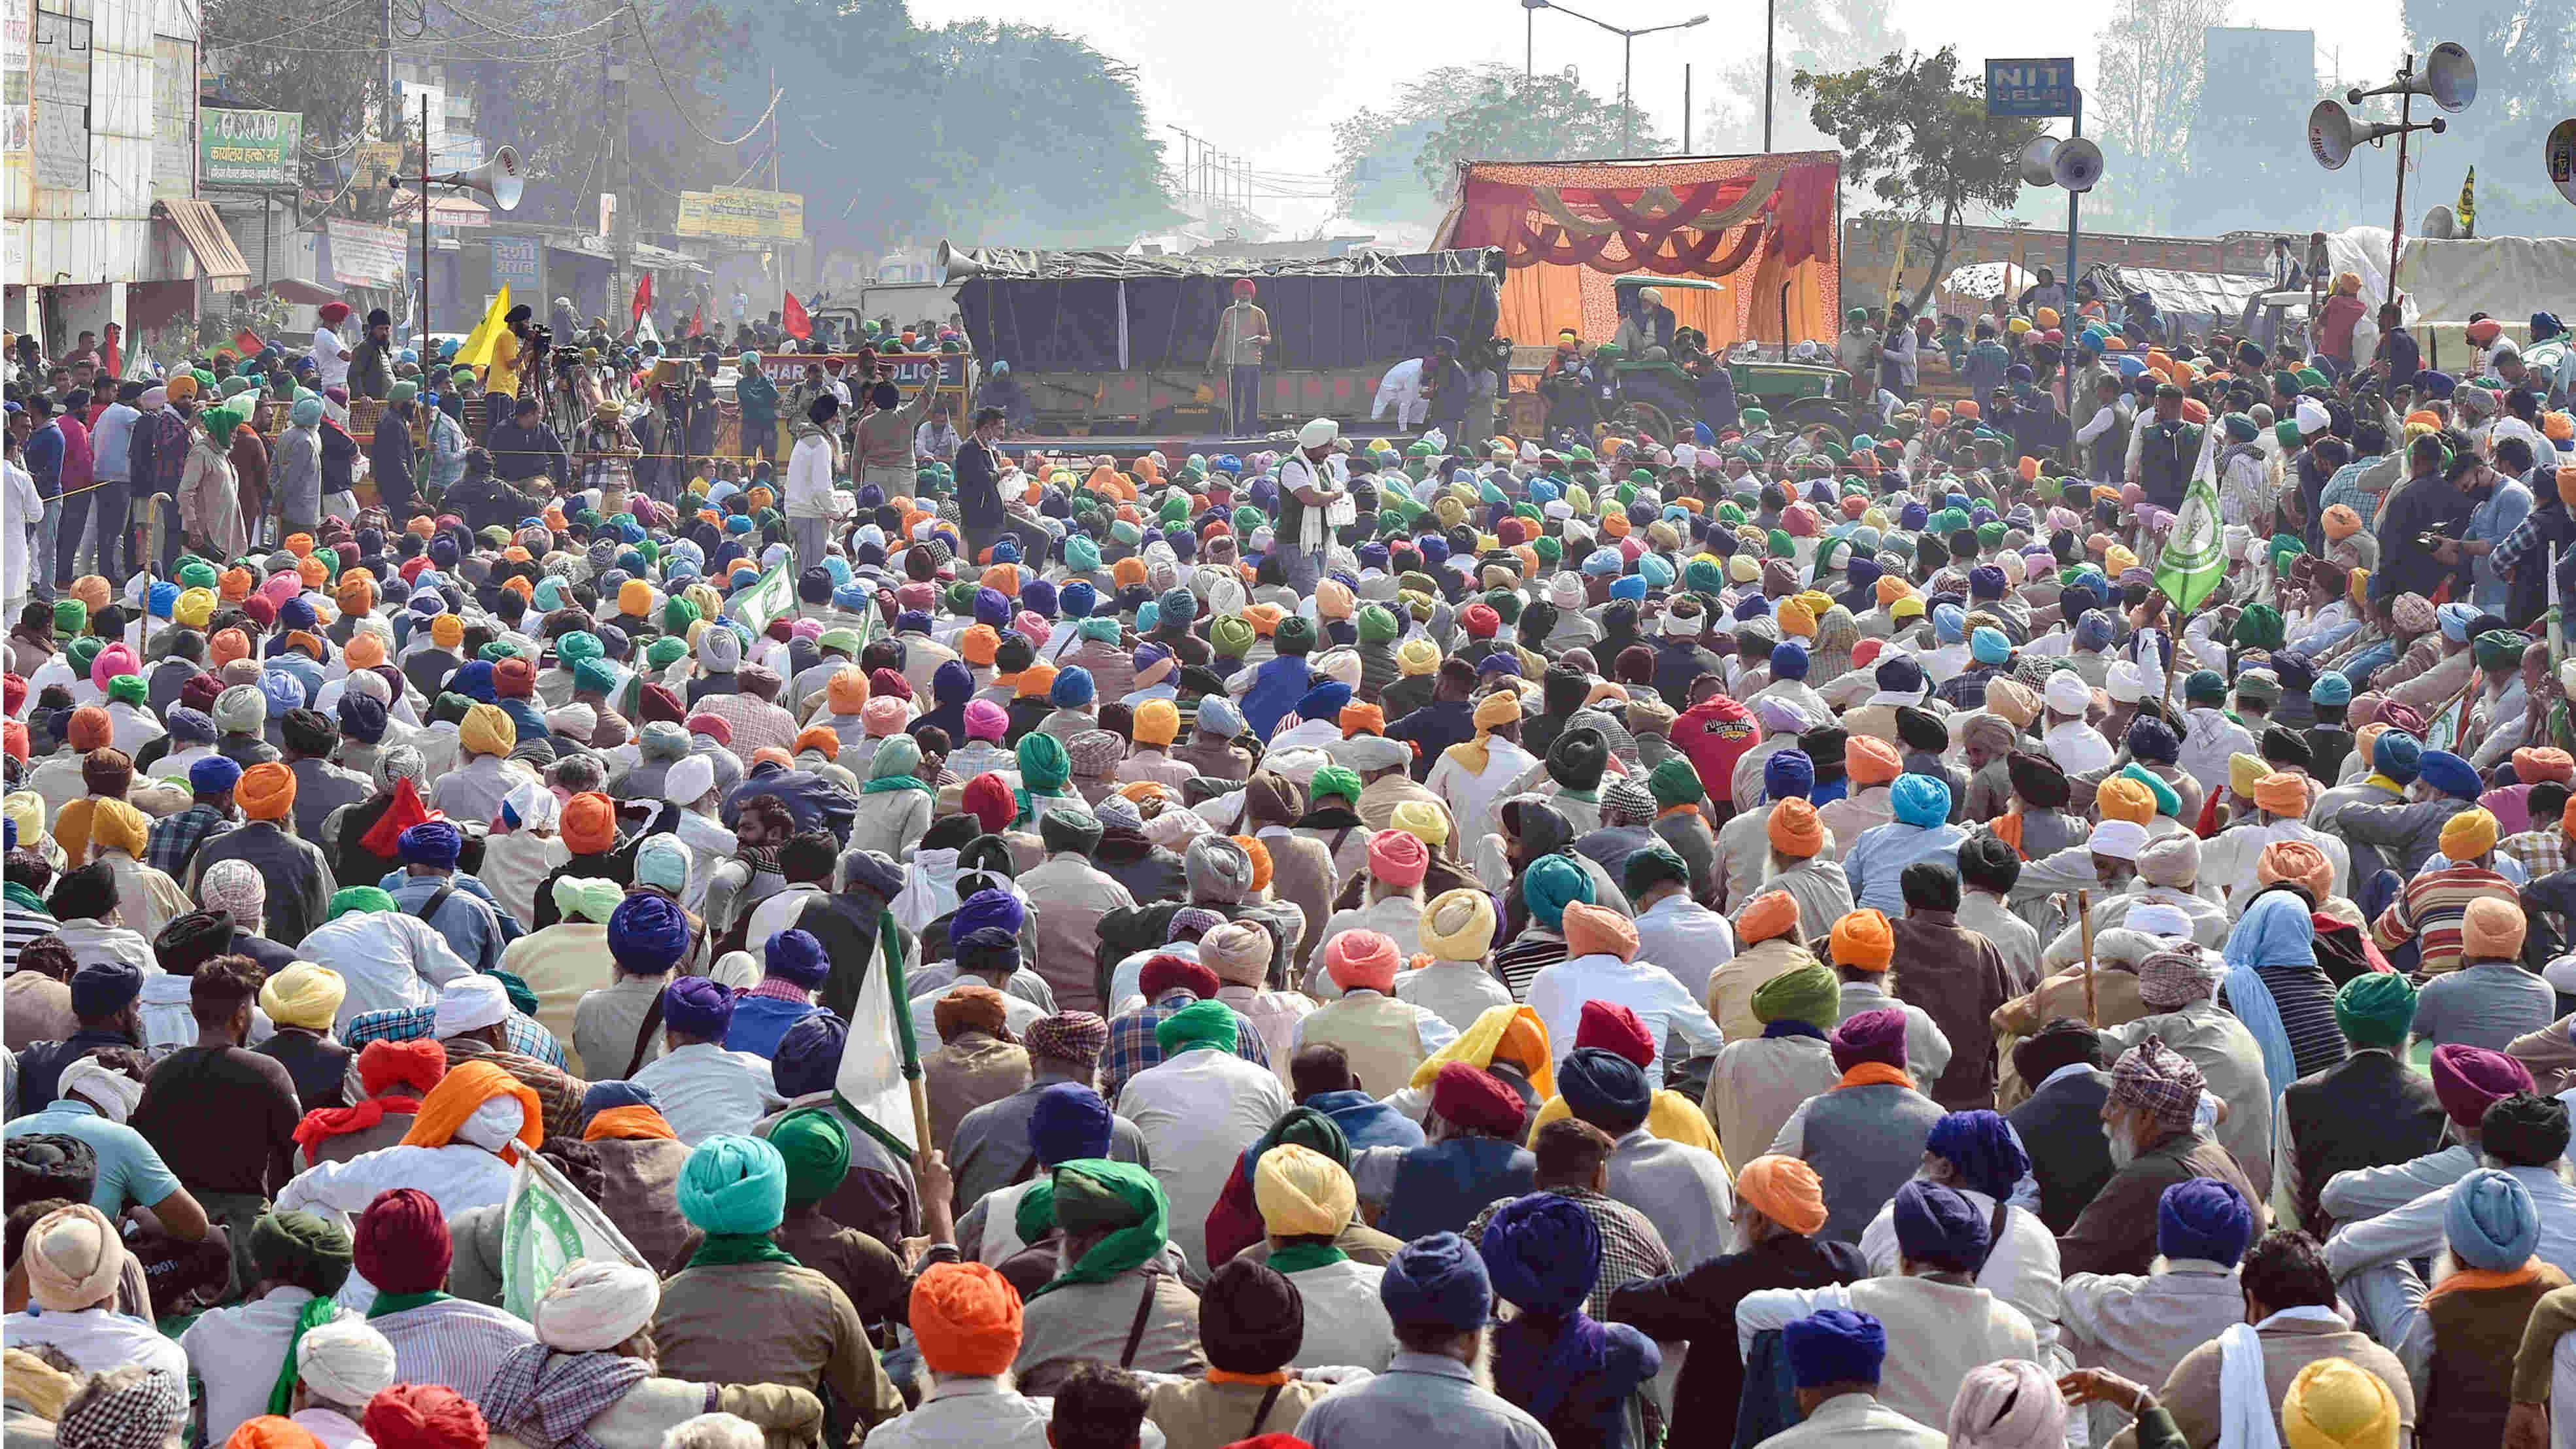 Government to address protesting farmers’ concerns with an open mind